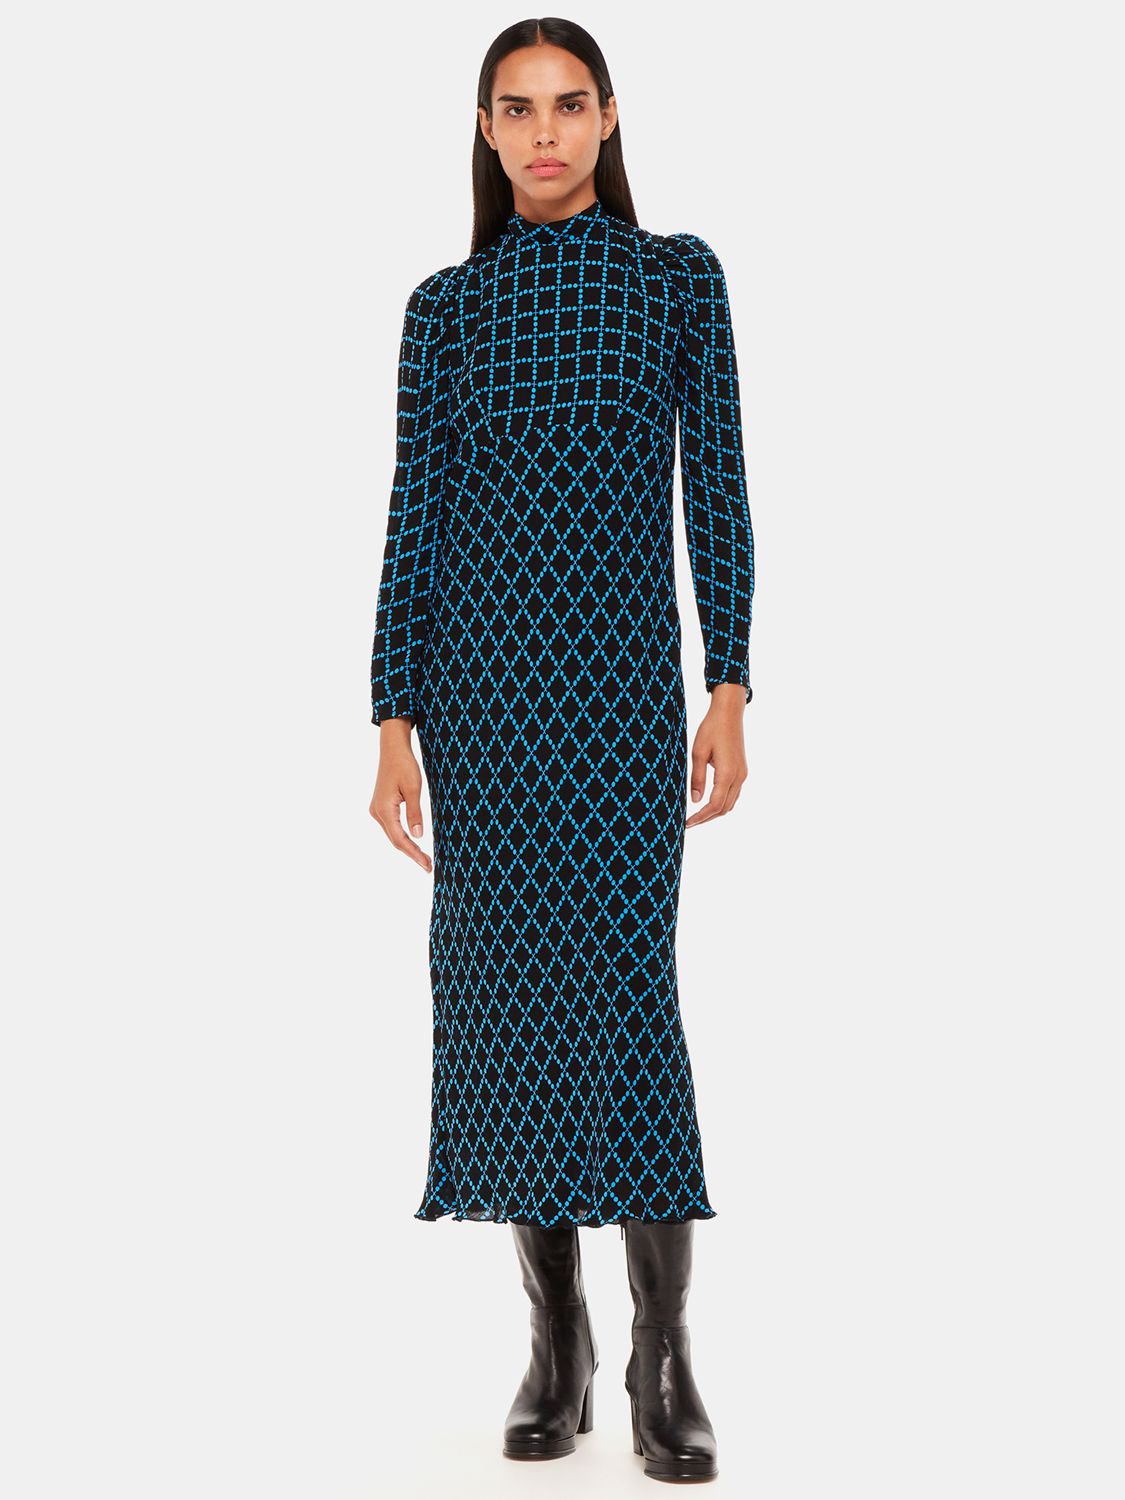 Whistles Abacus Check High Neck Dress, Blue/Multi at John Lewis & Partners